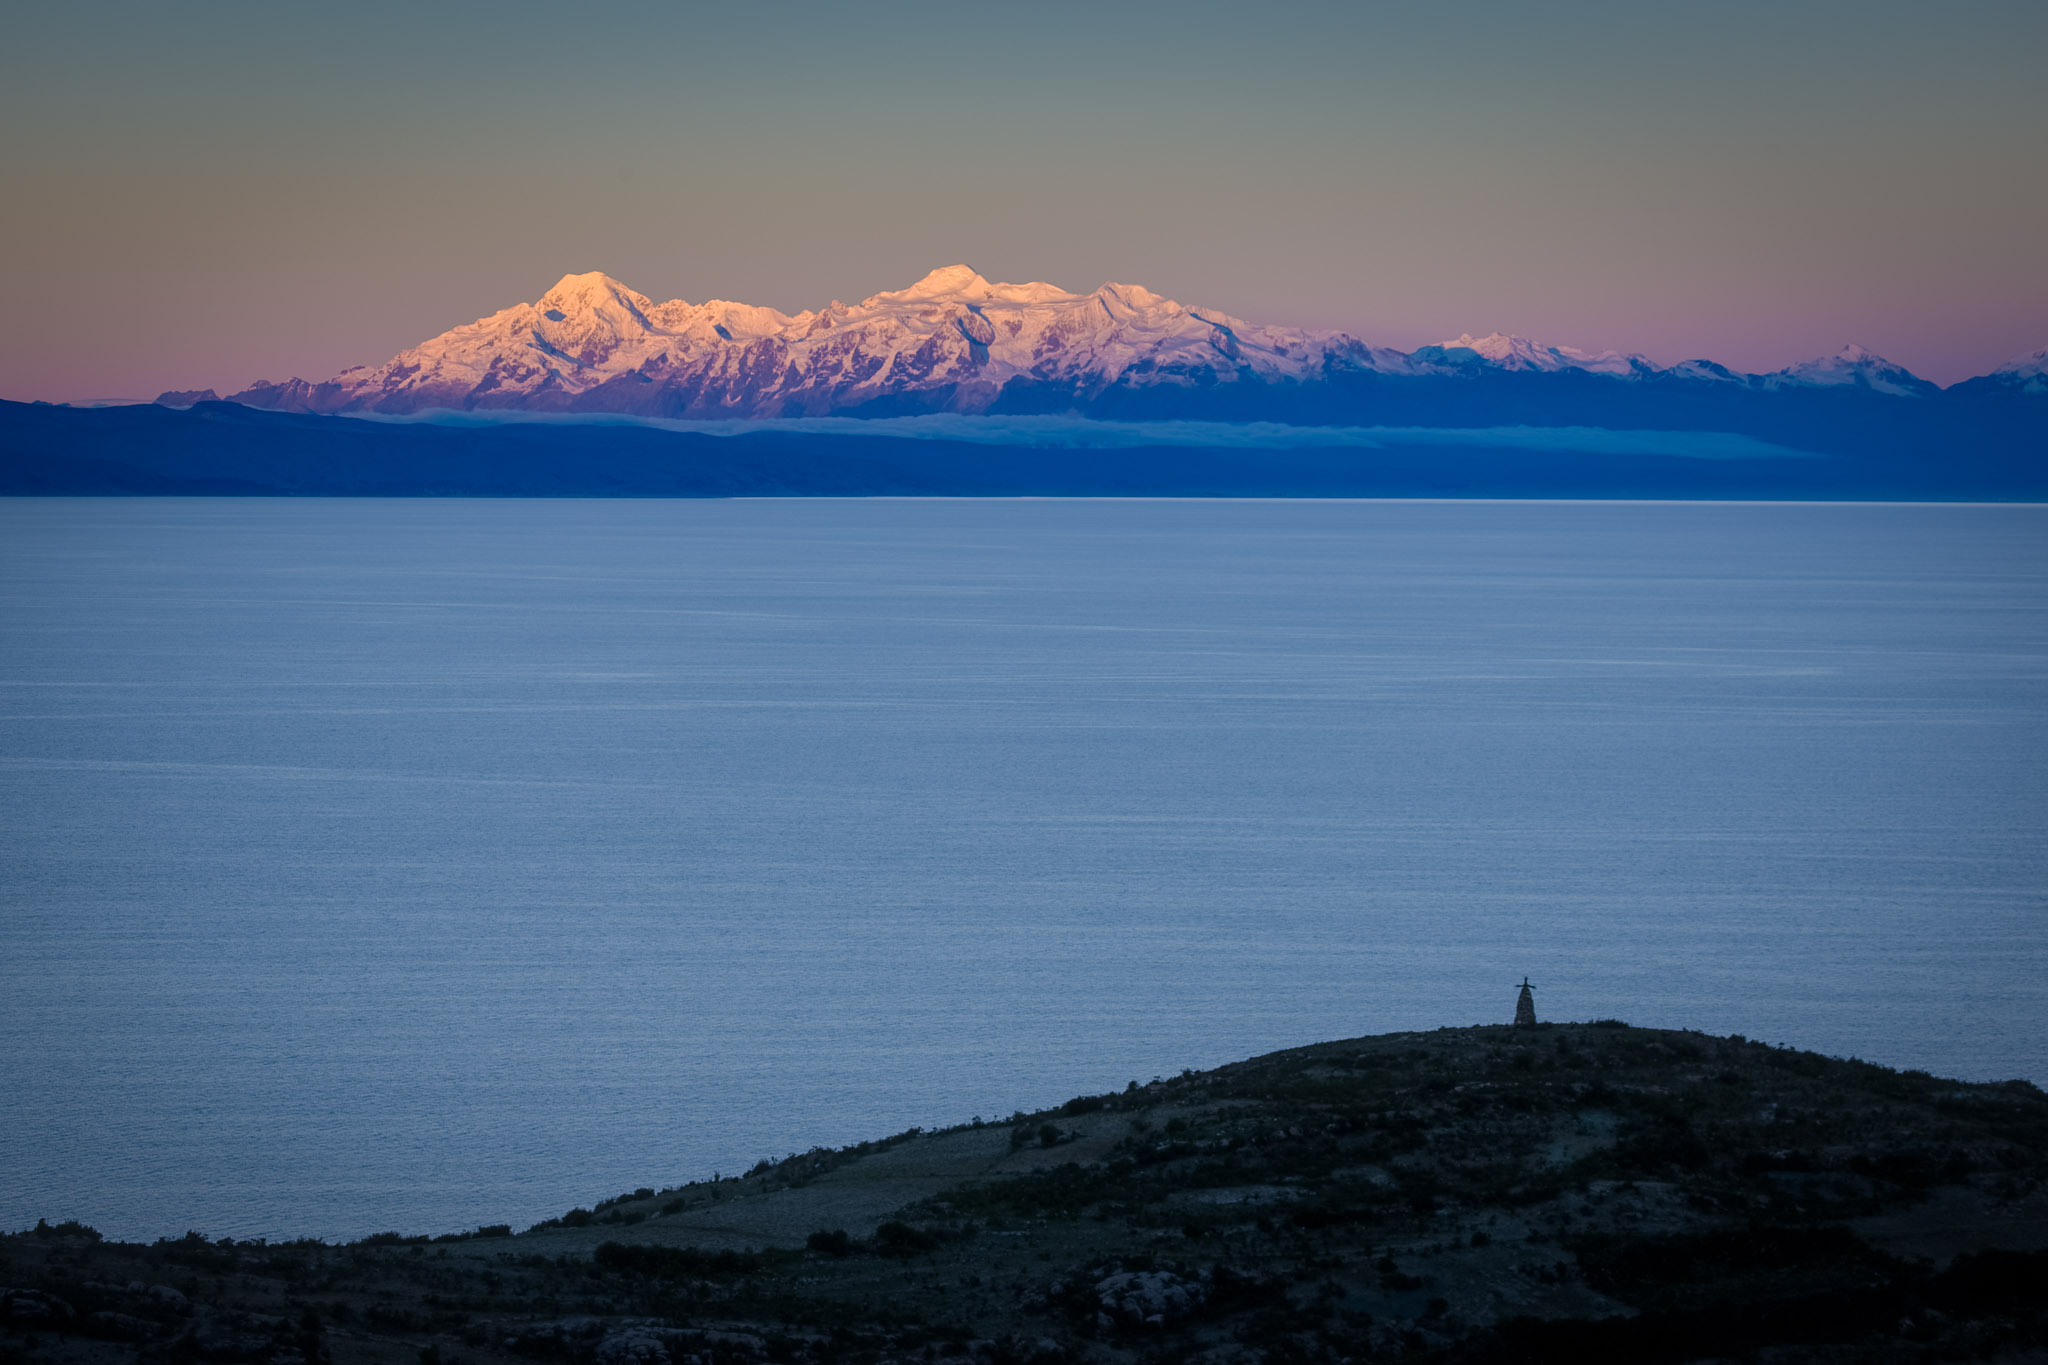 Last light on the Andes from Isla del Sol